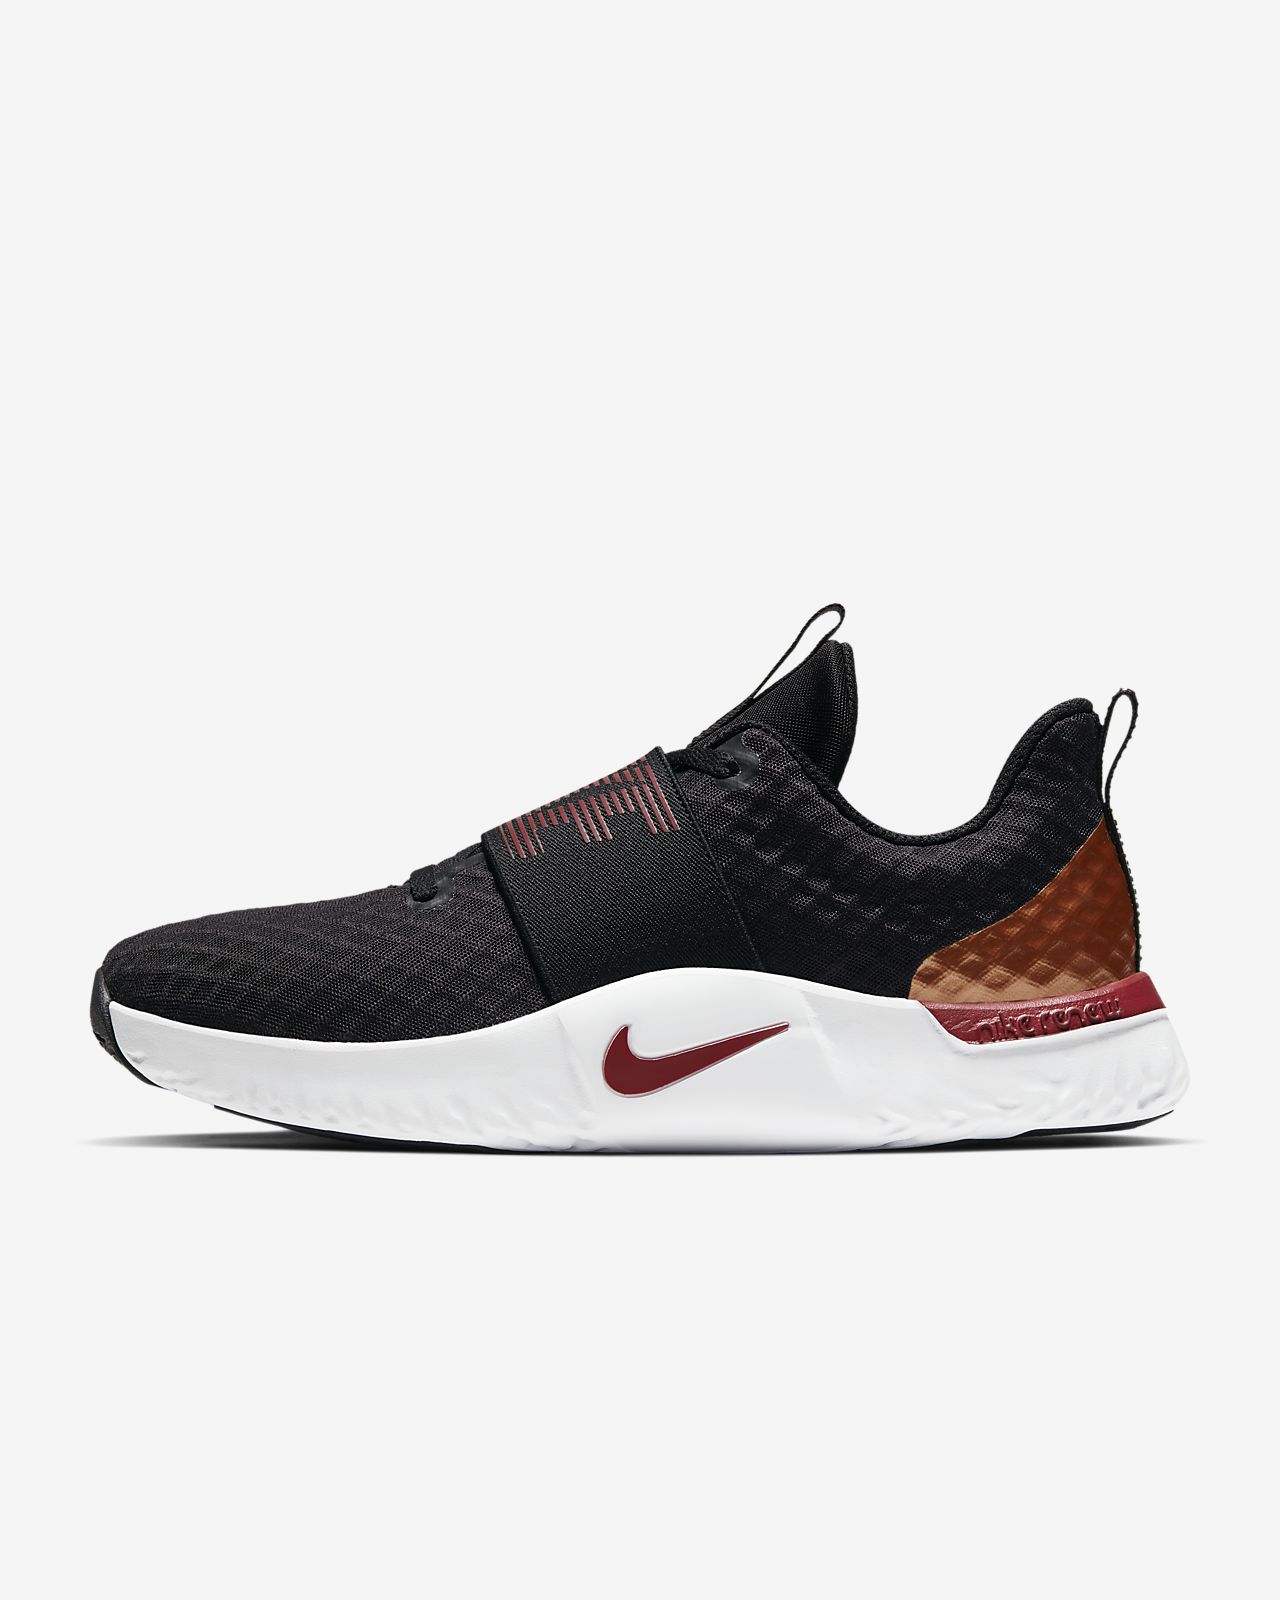 nike women's shoes with good arch support